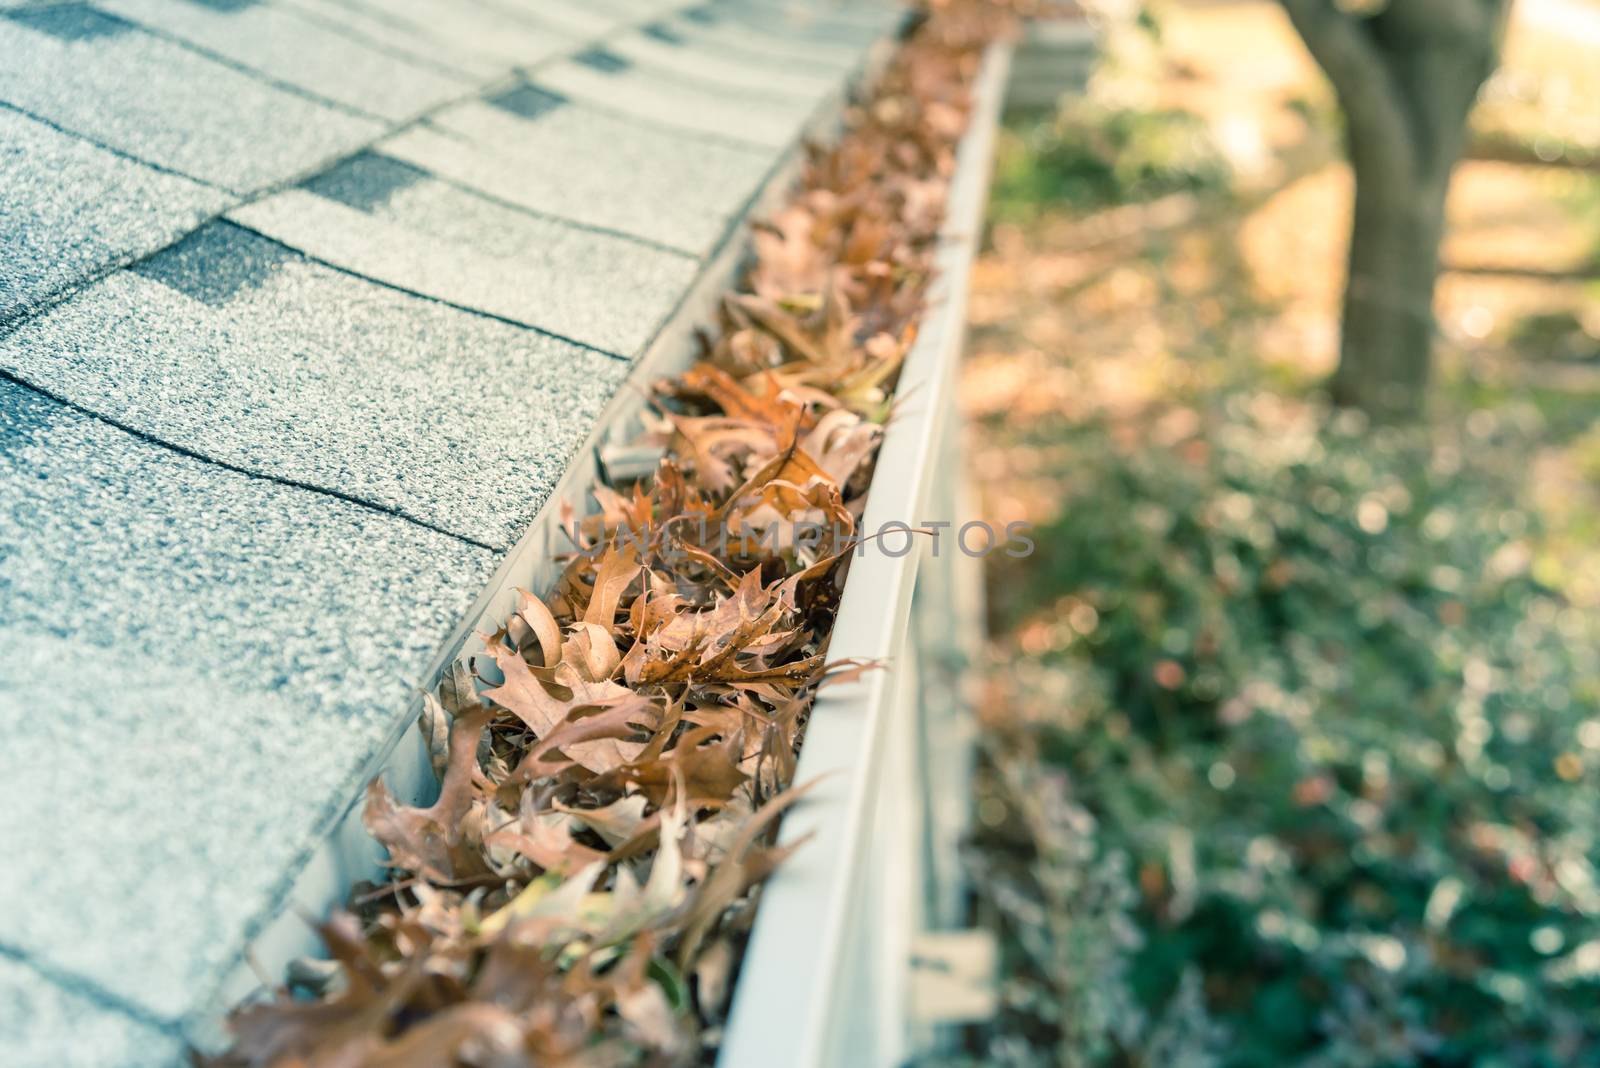 Clogged gutter at front yard near roof shingles of residential house full of dried leaves by trongnguyen